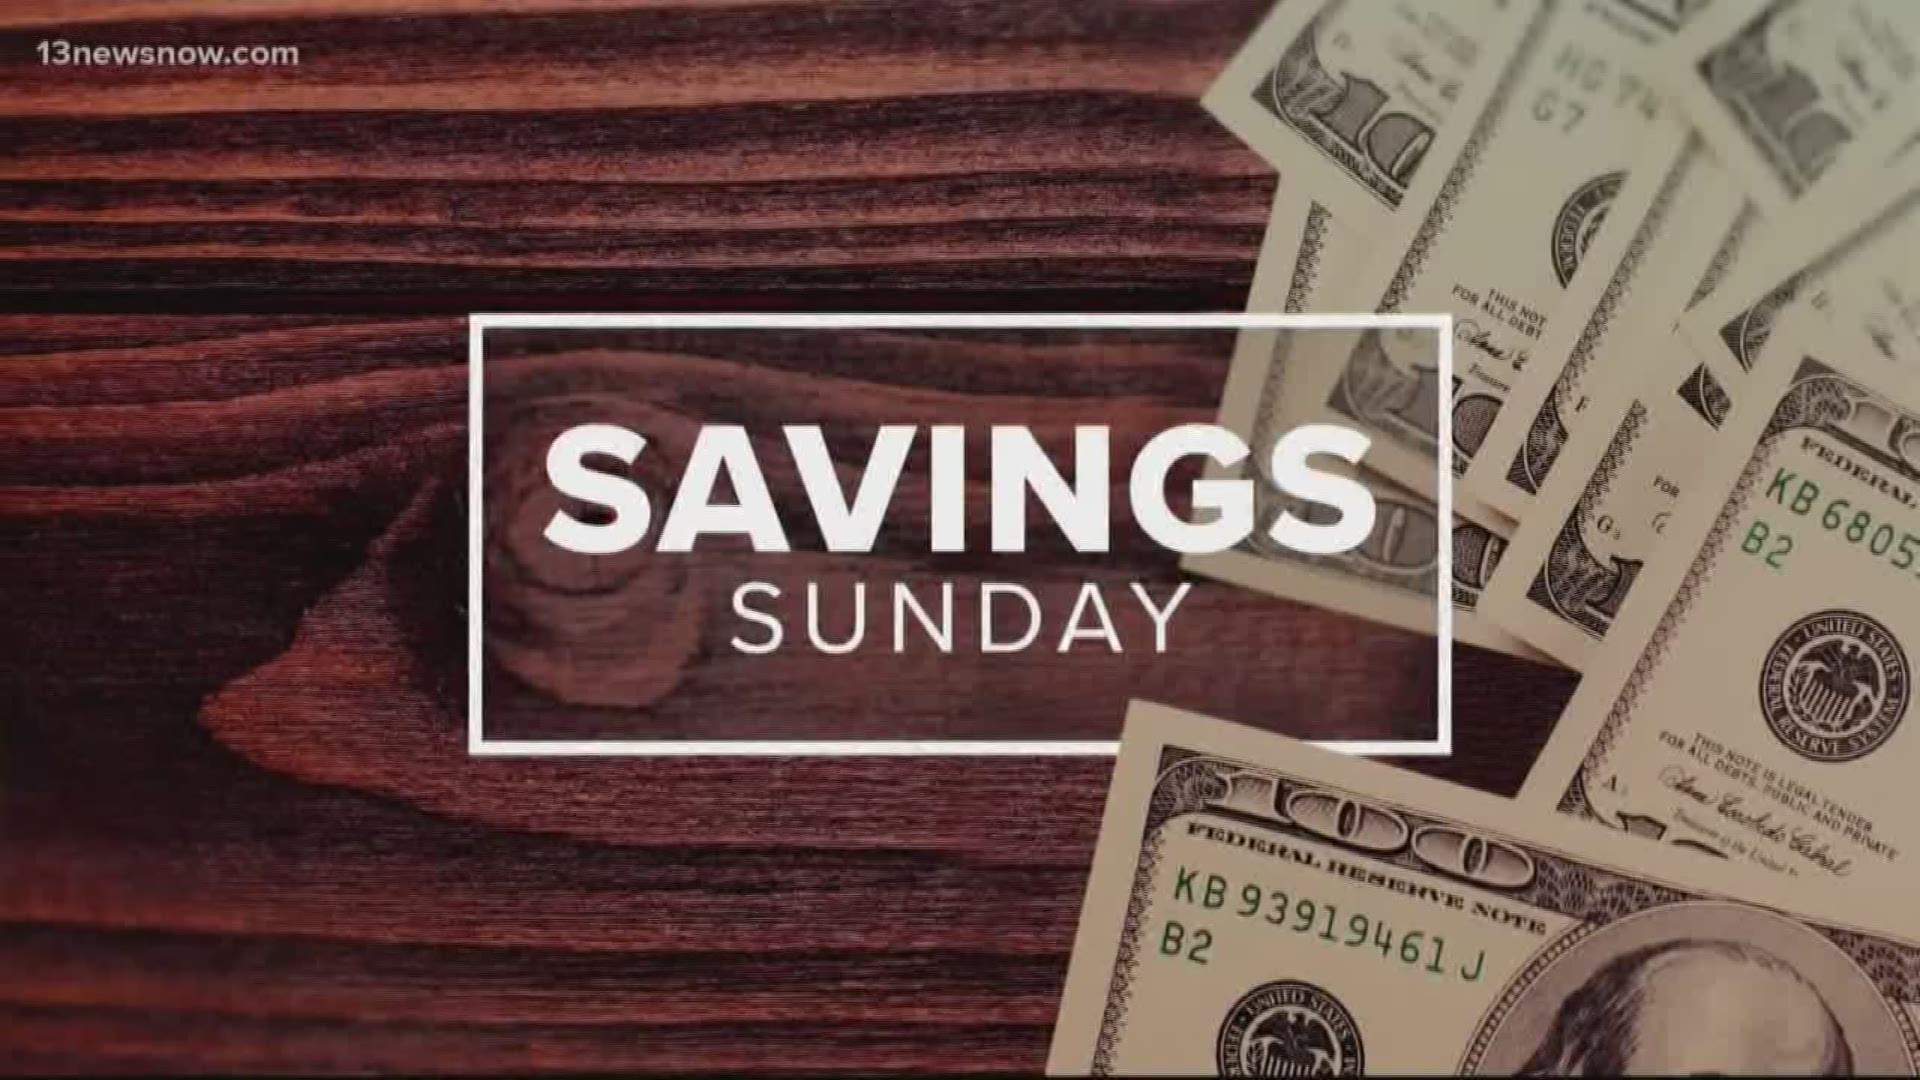 Laura Oliver from www.afrugalchick.com has your big savings for the week of July 28, 2019.